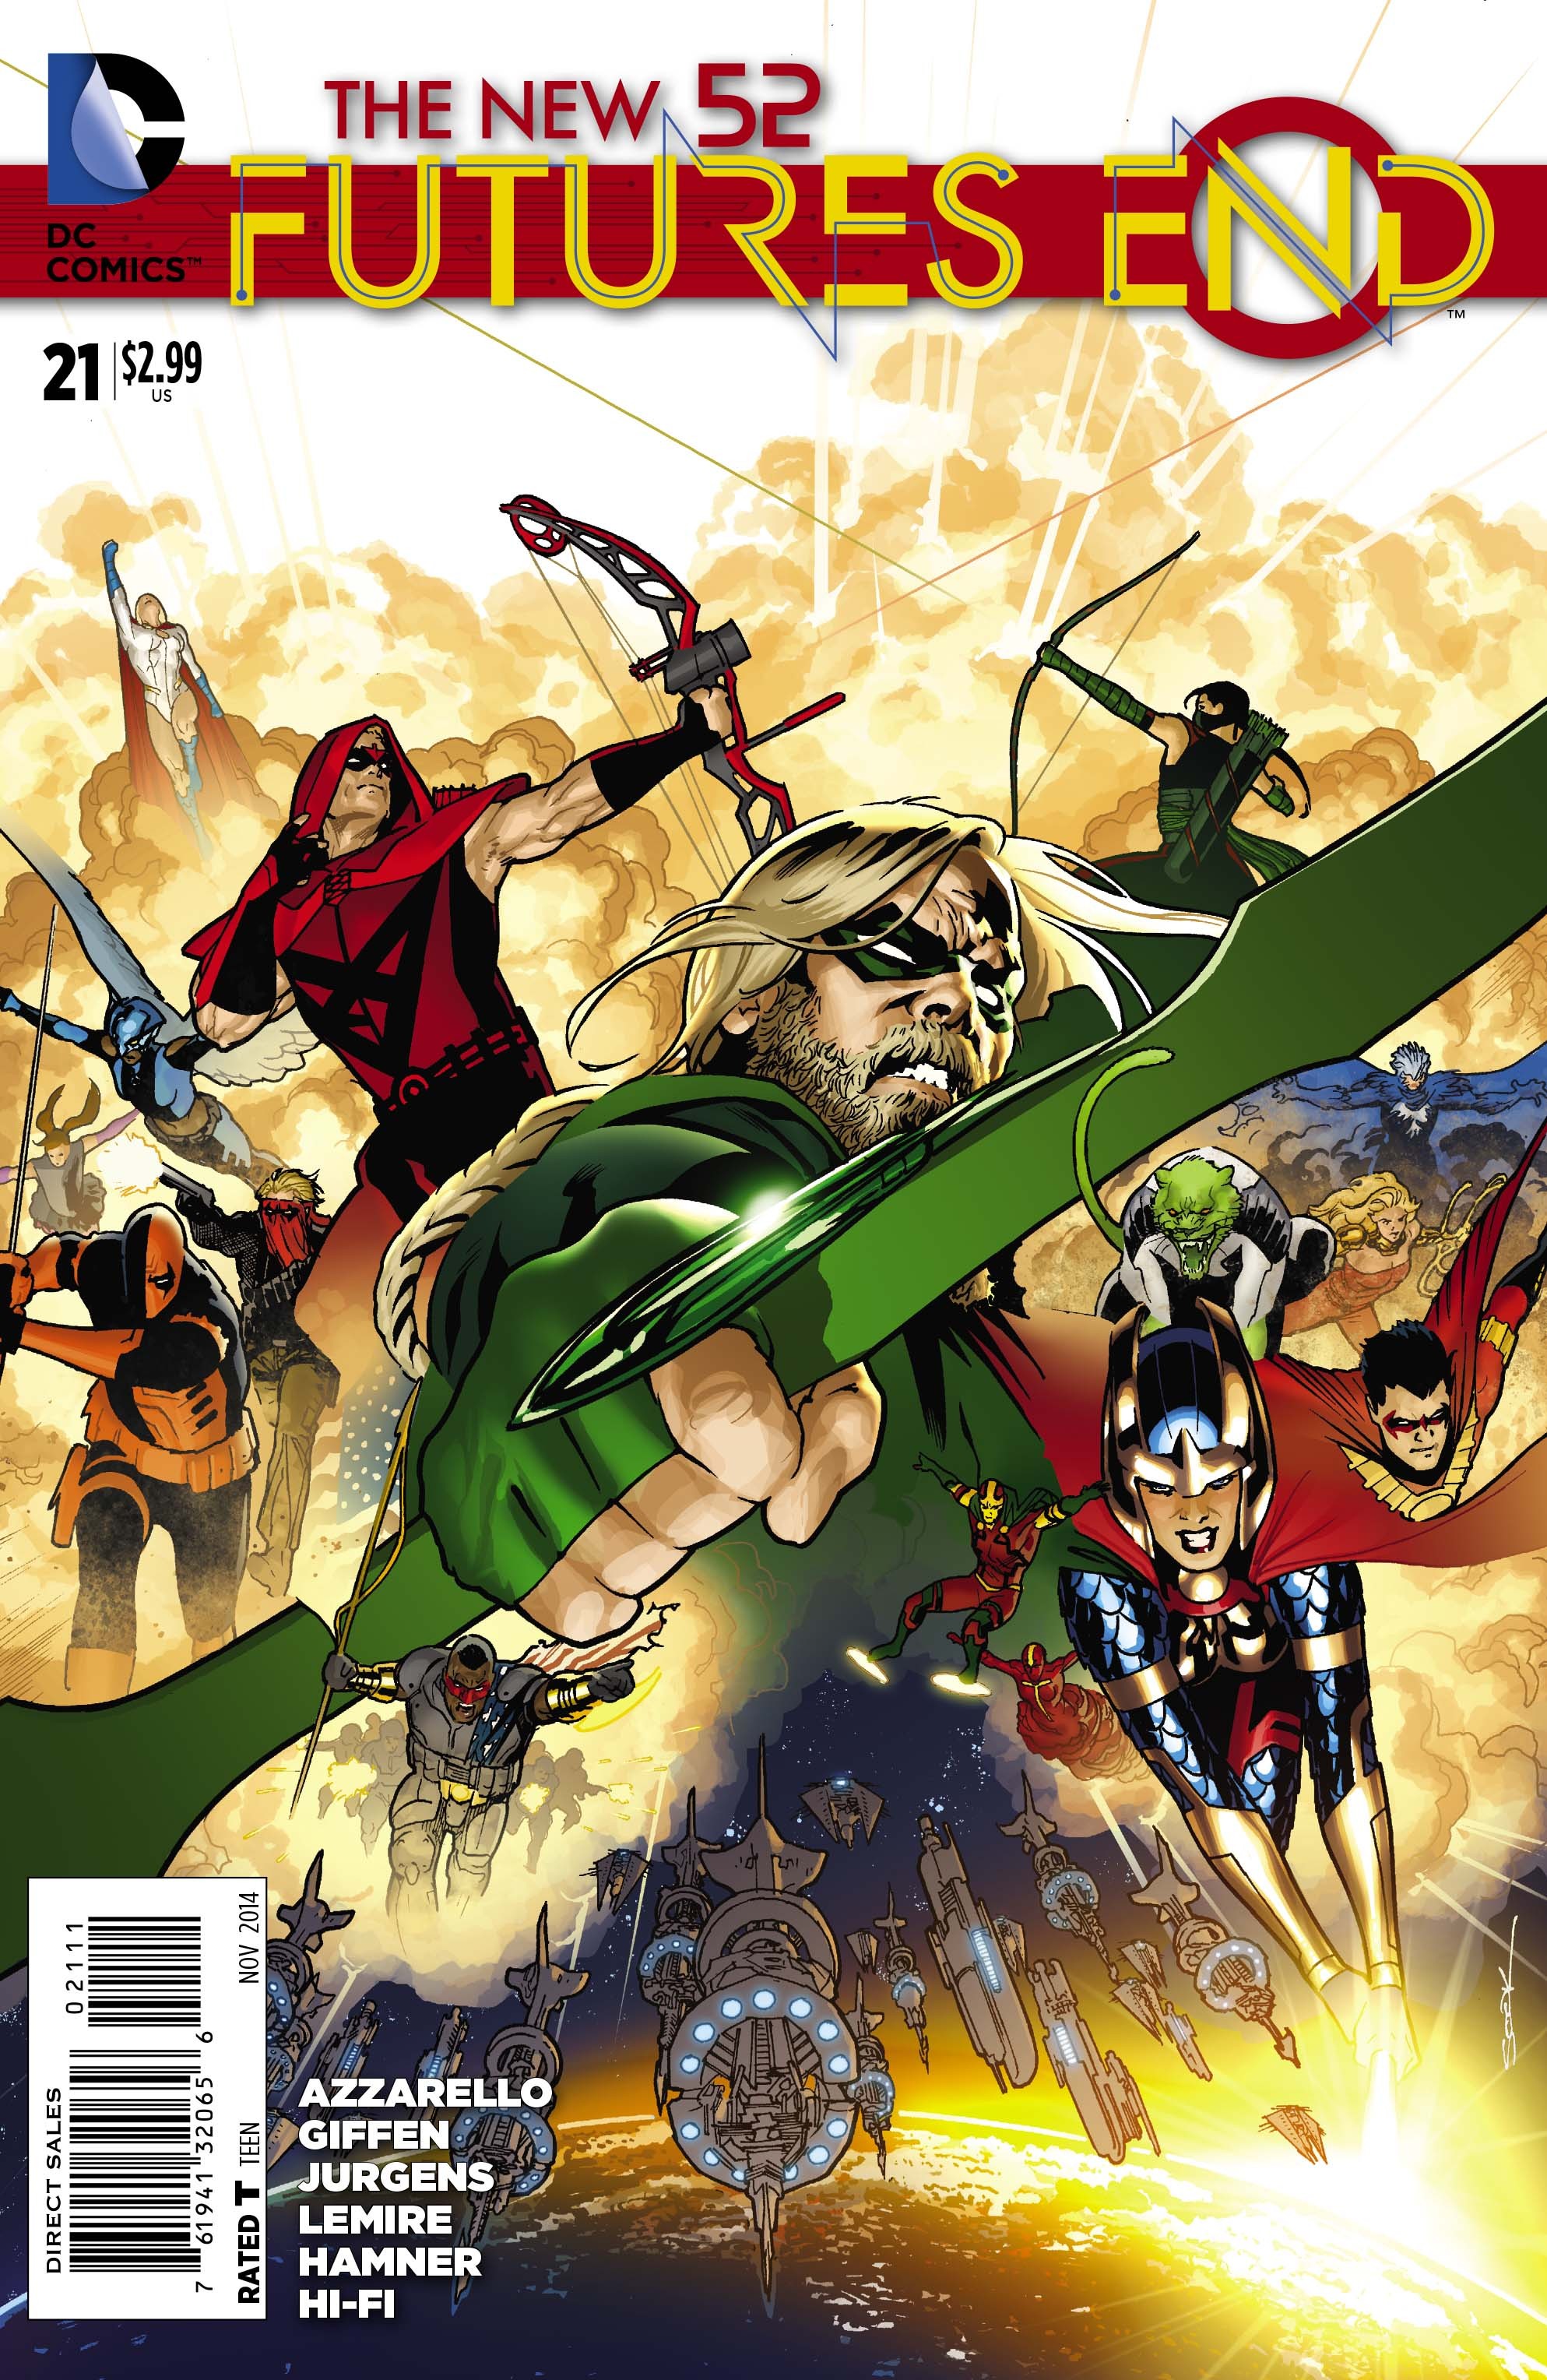 The New 52: Futures End Vol. 1 #21